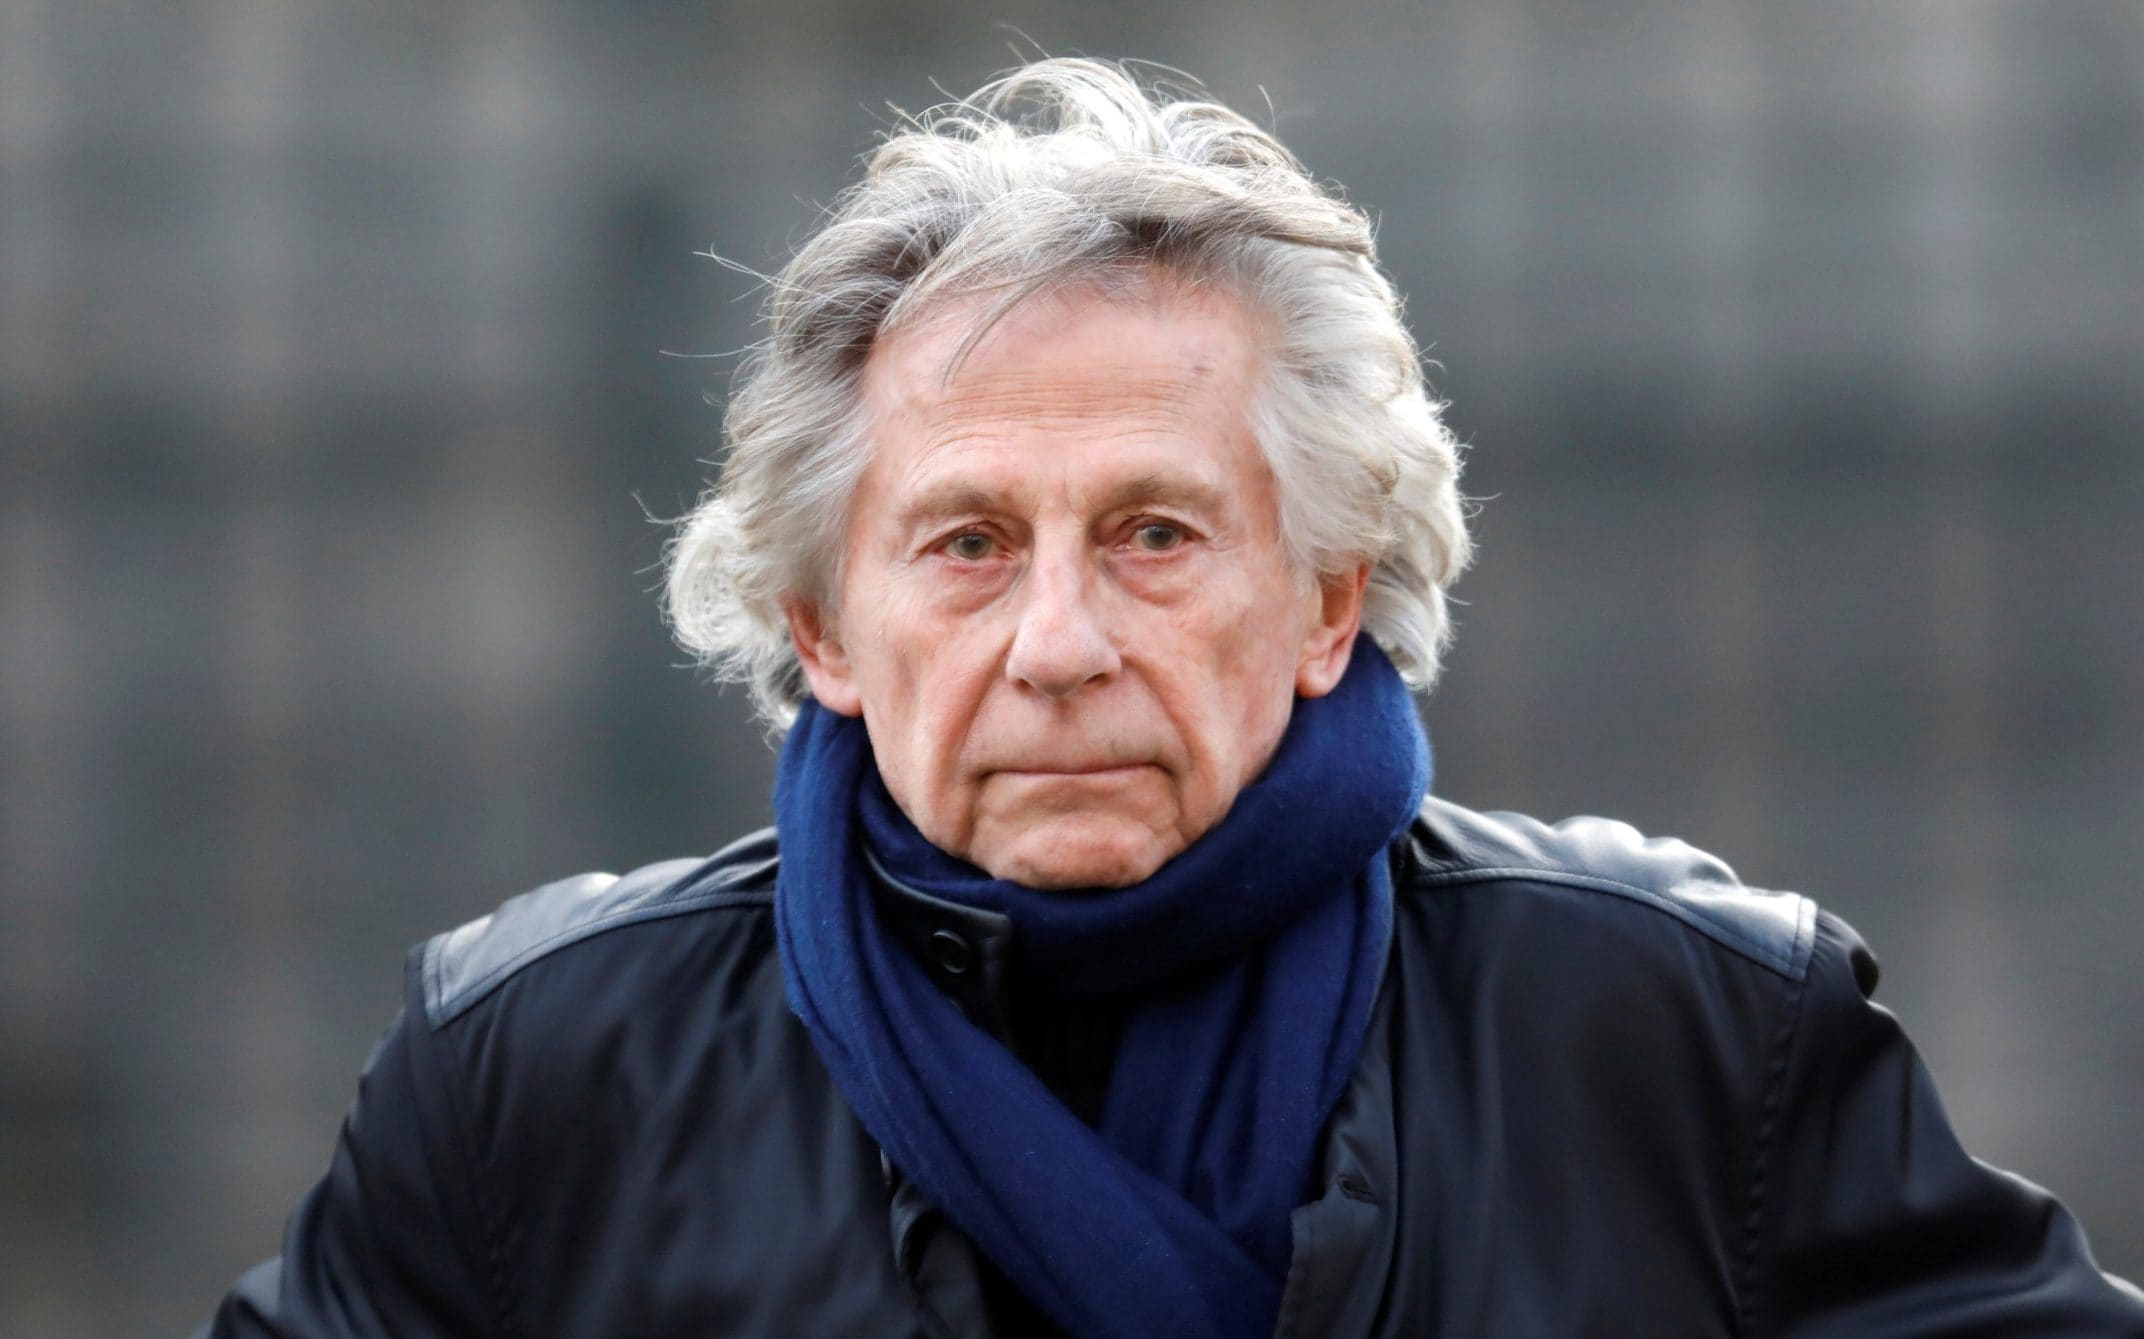 Movie director Roman Polanski to face civil trial in LA next year for alleged 1973 rape of teen